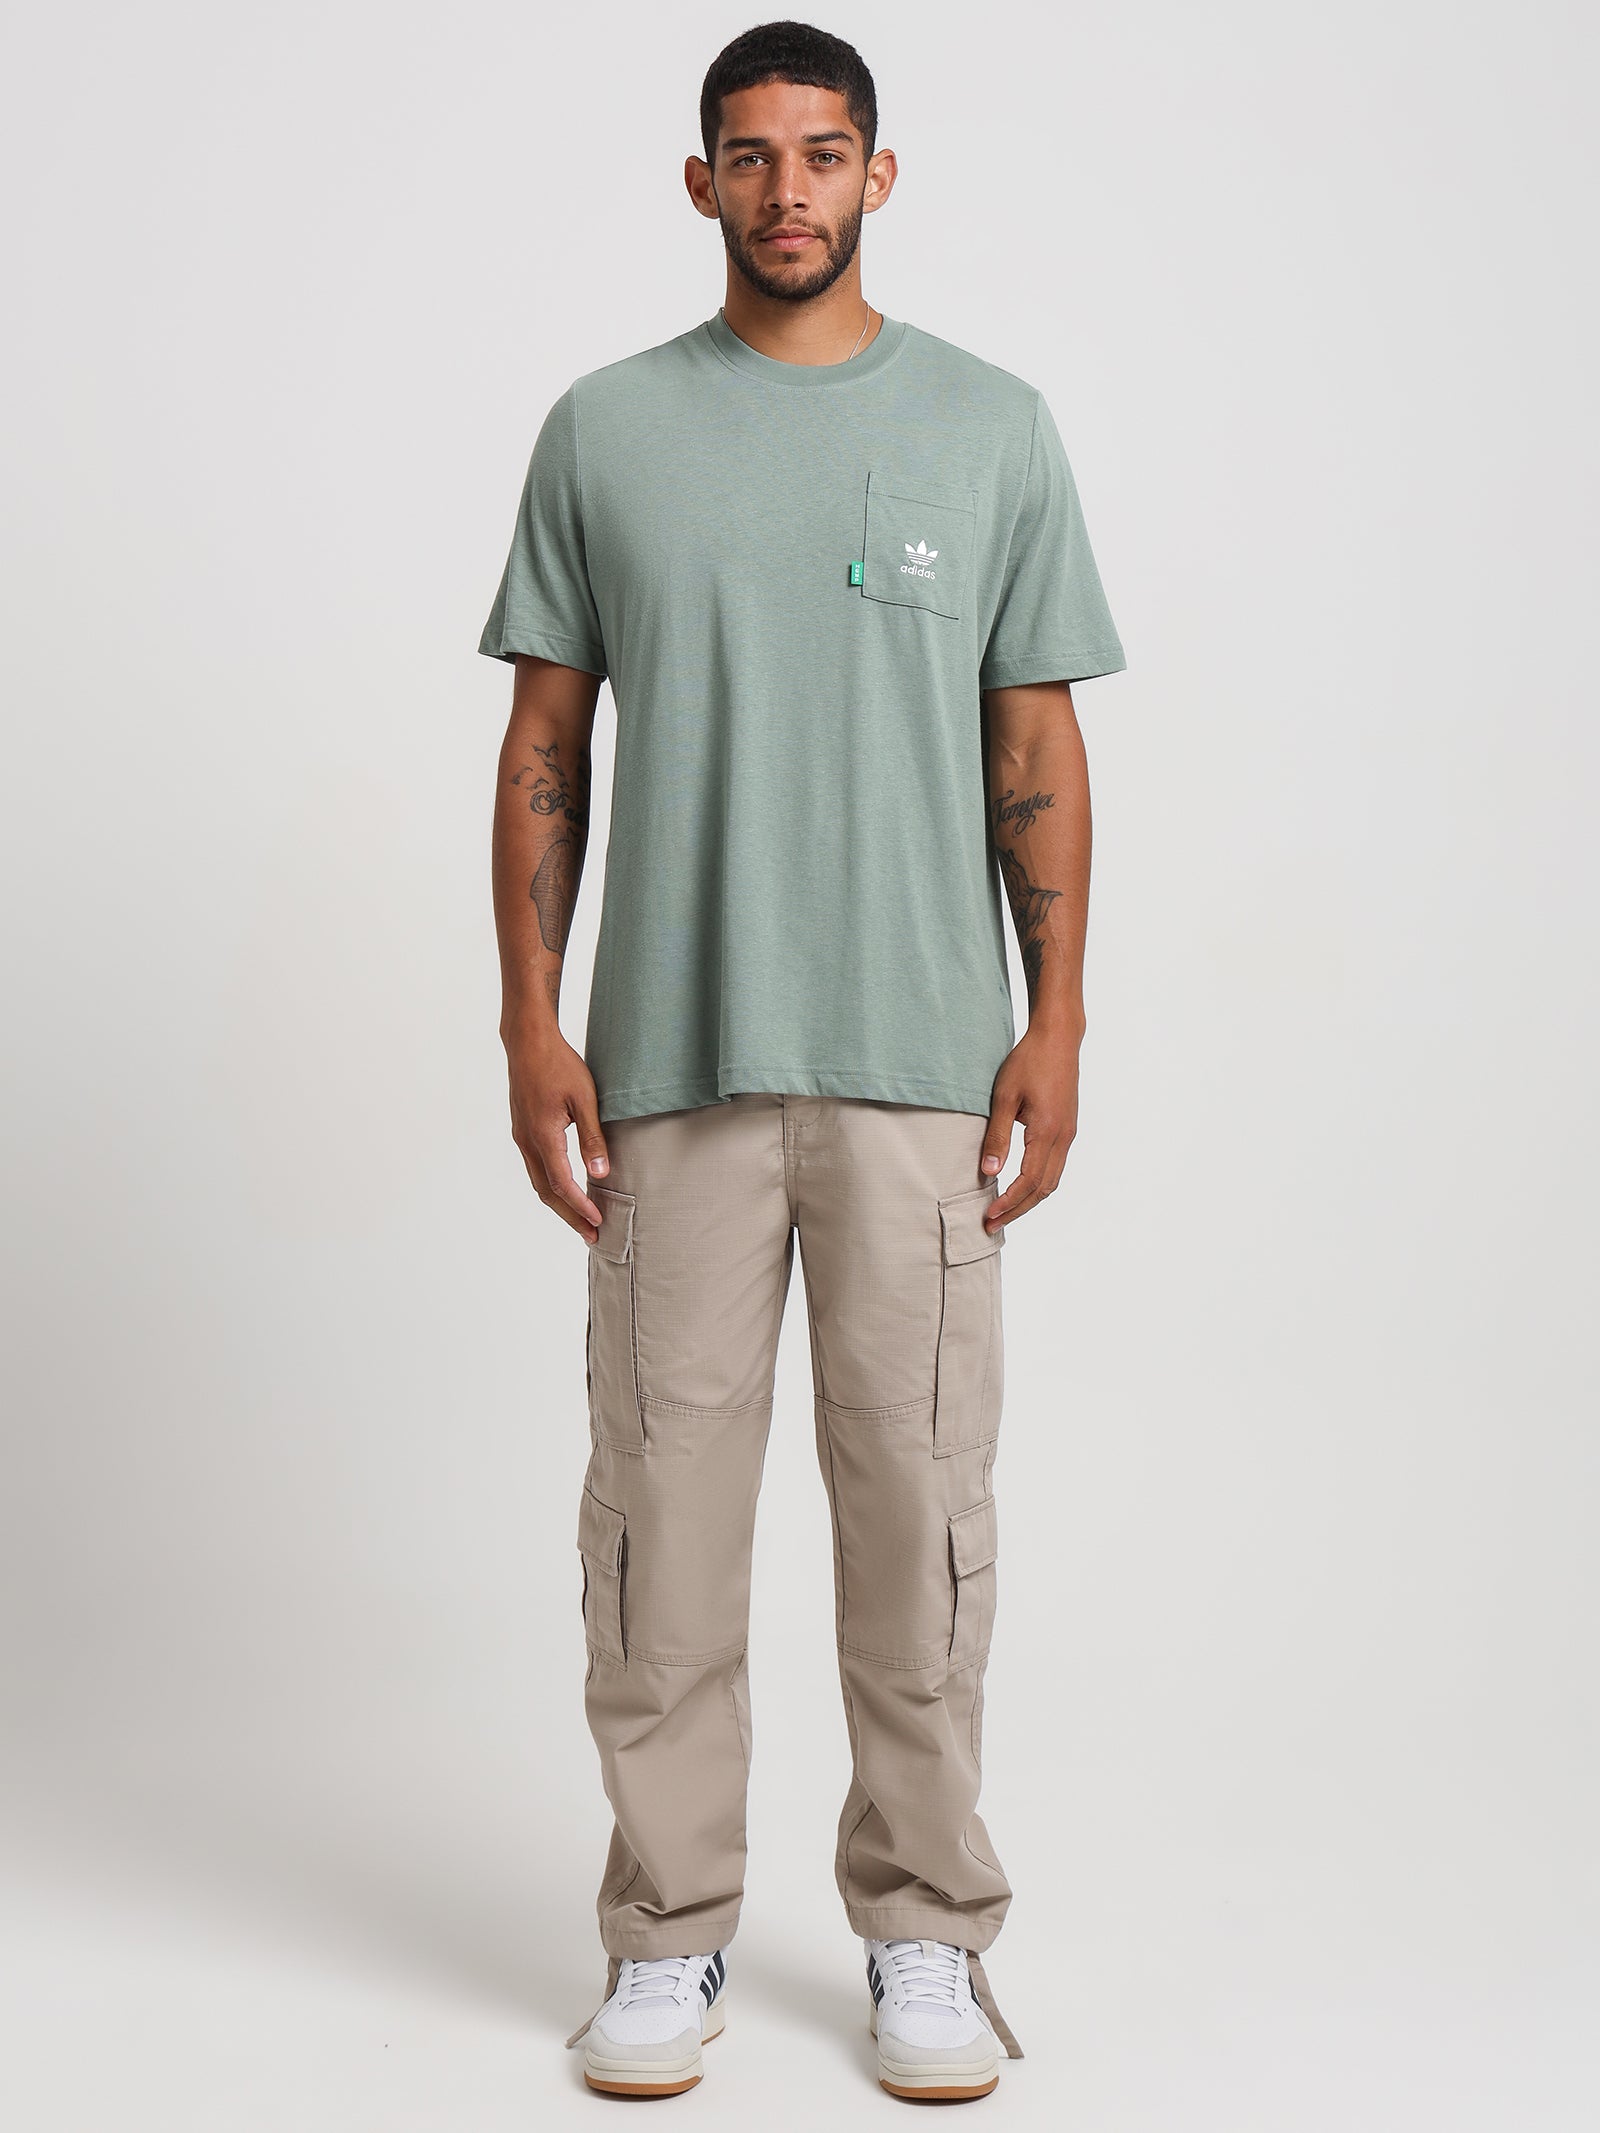 Essentials+ Made With Store Hemp Silver - in Green Glue T-Shirt